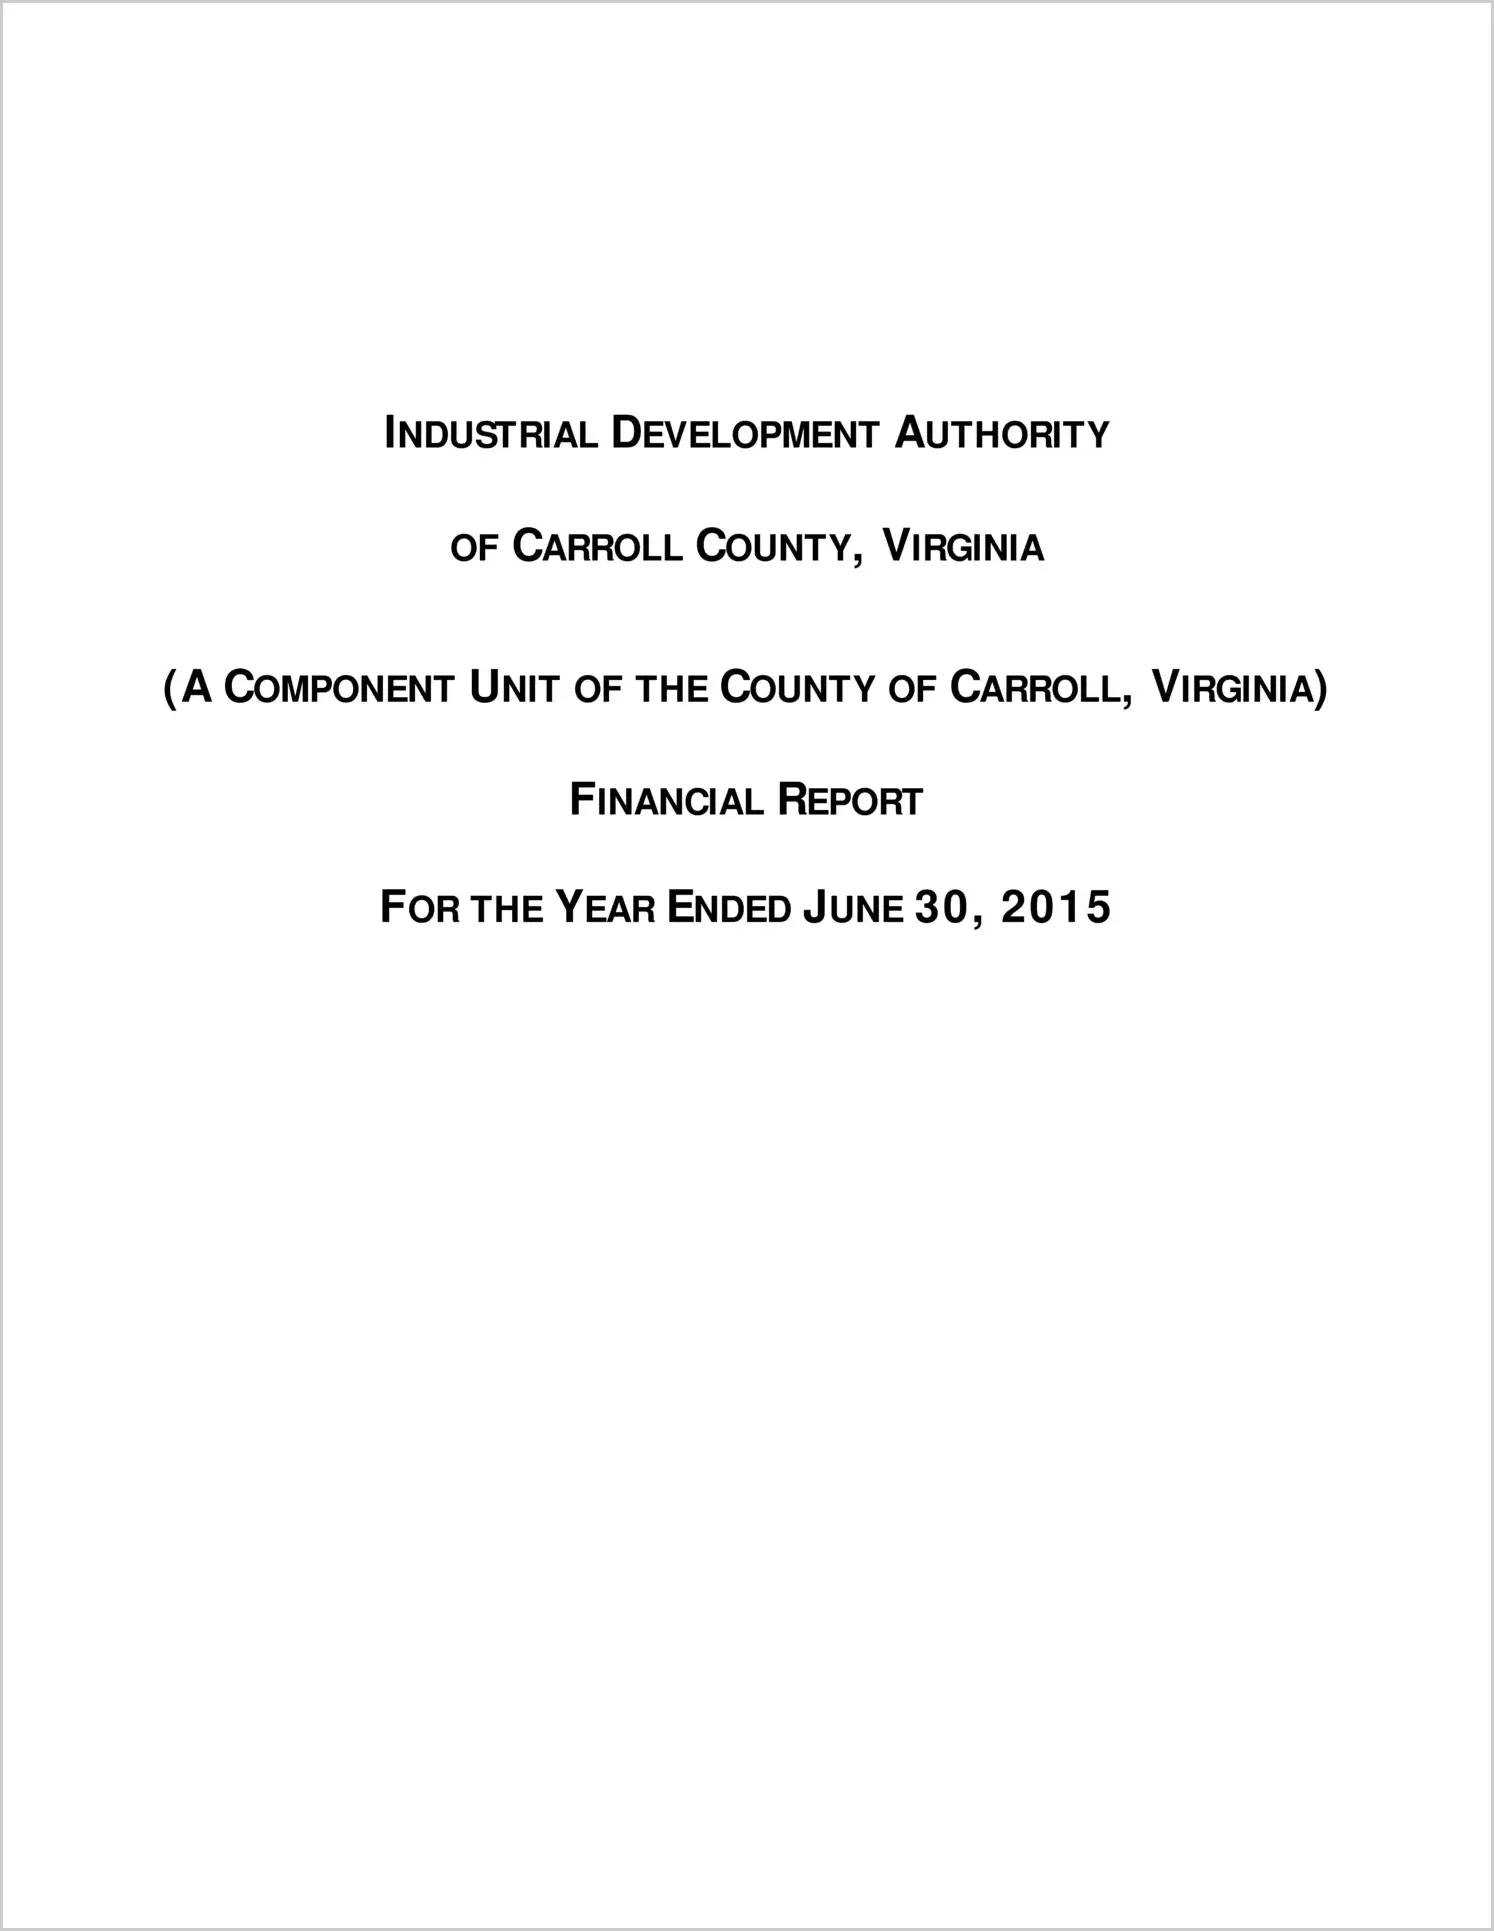 2015 ABC/Other Annual Financial Report  for Carroll County Industrial Development Authority